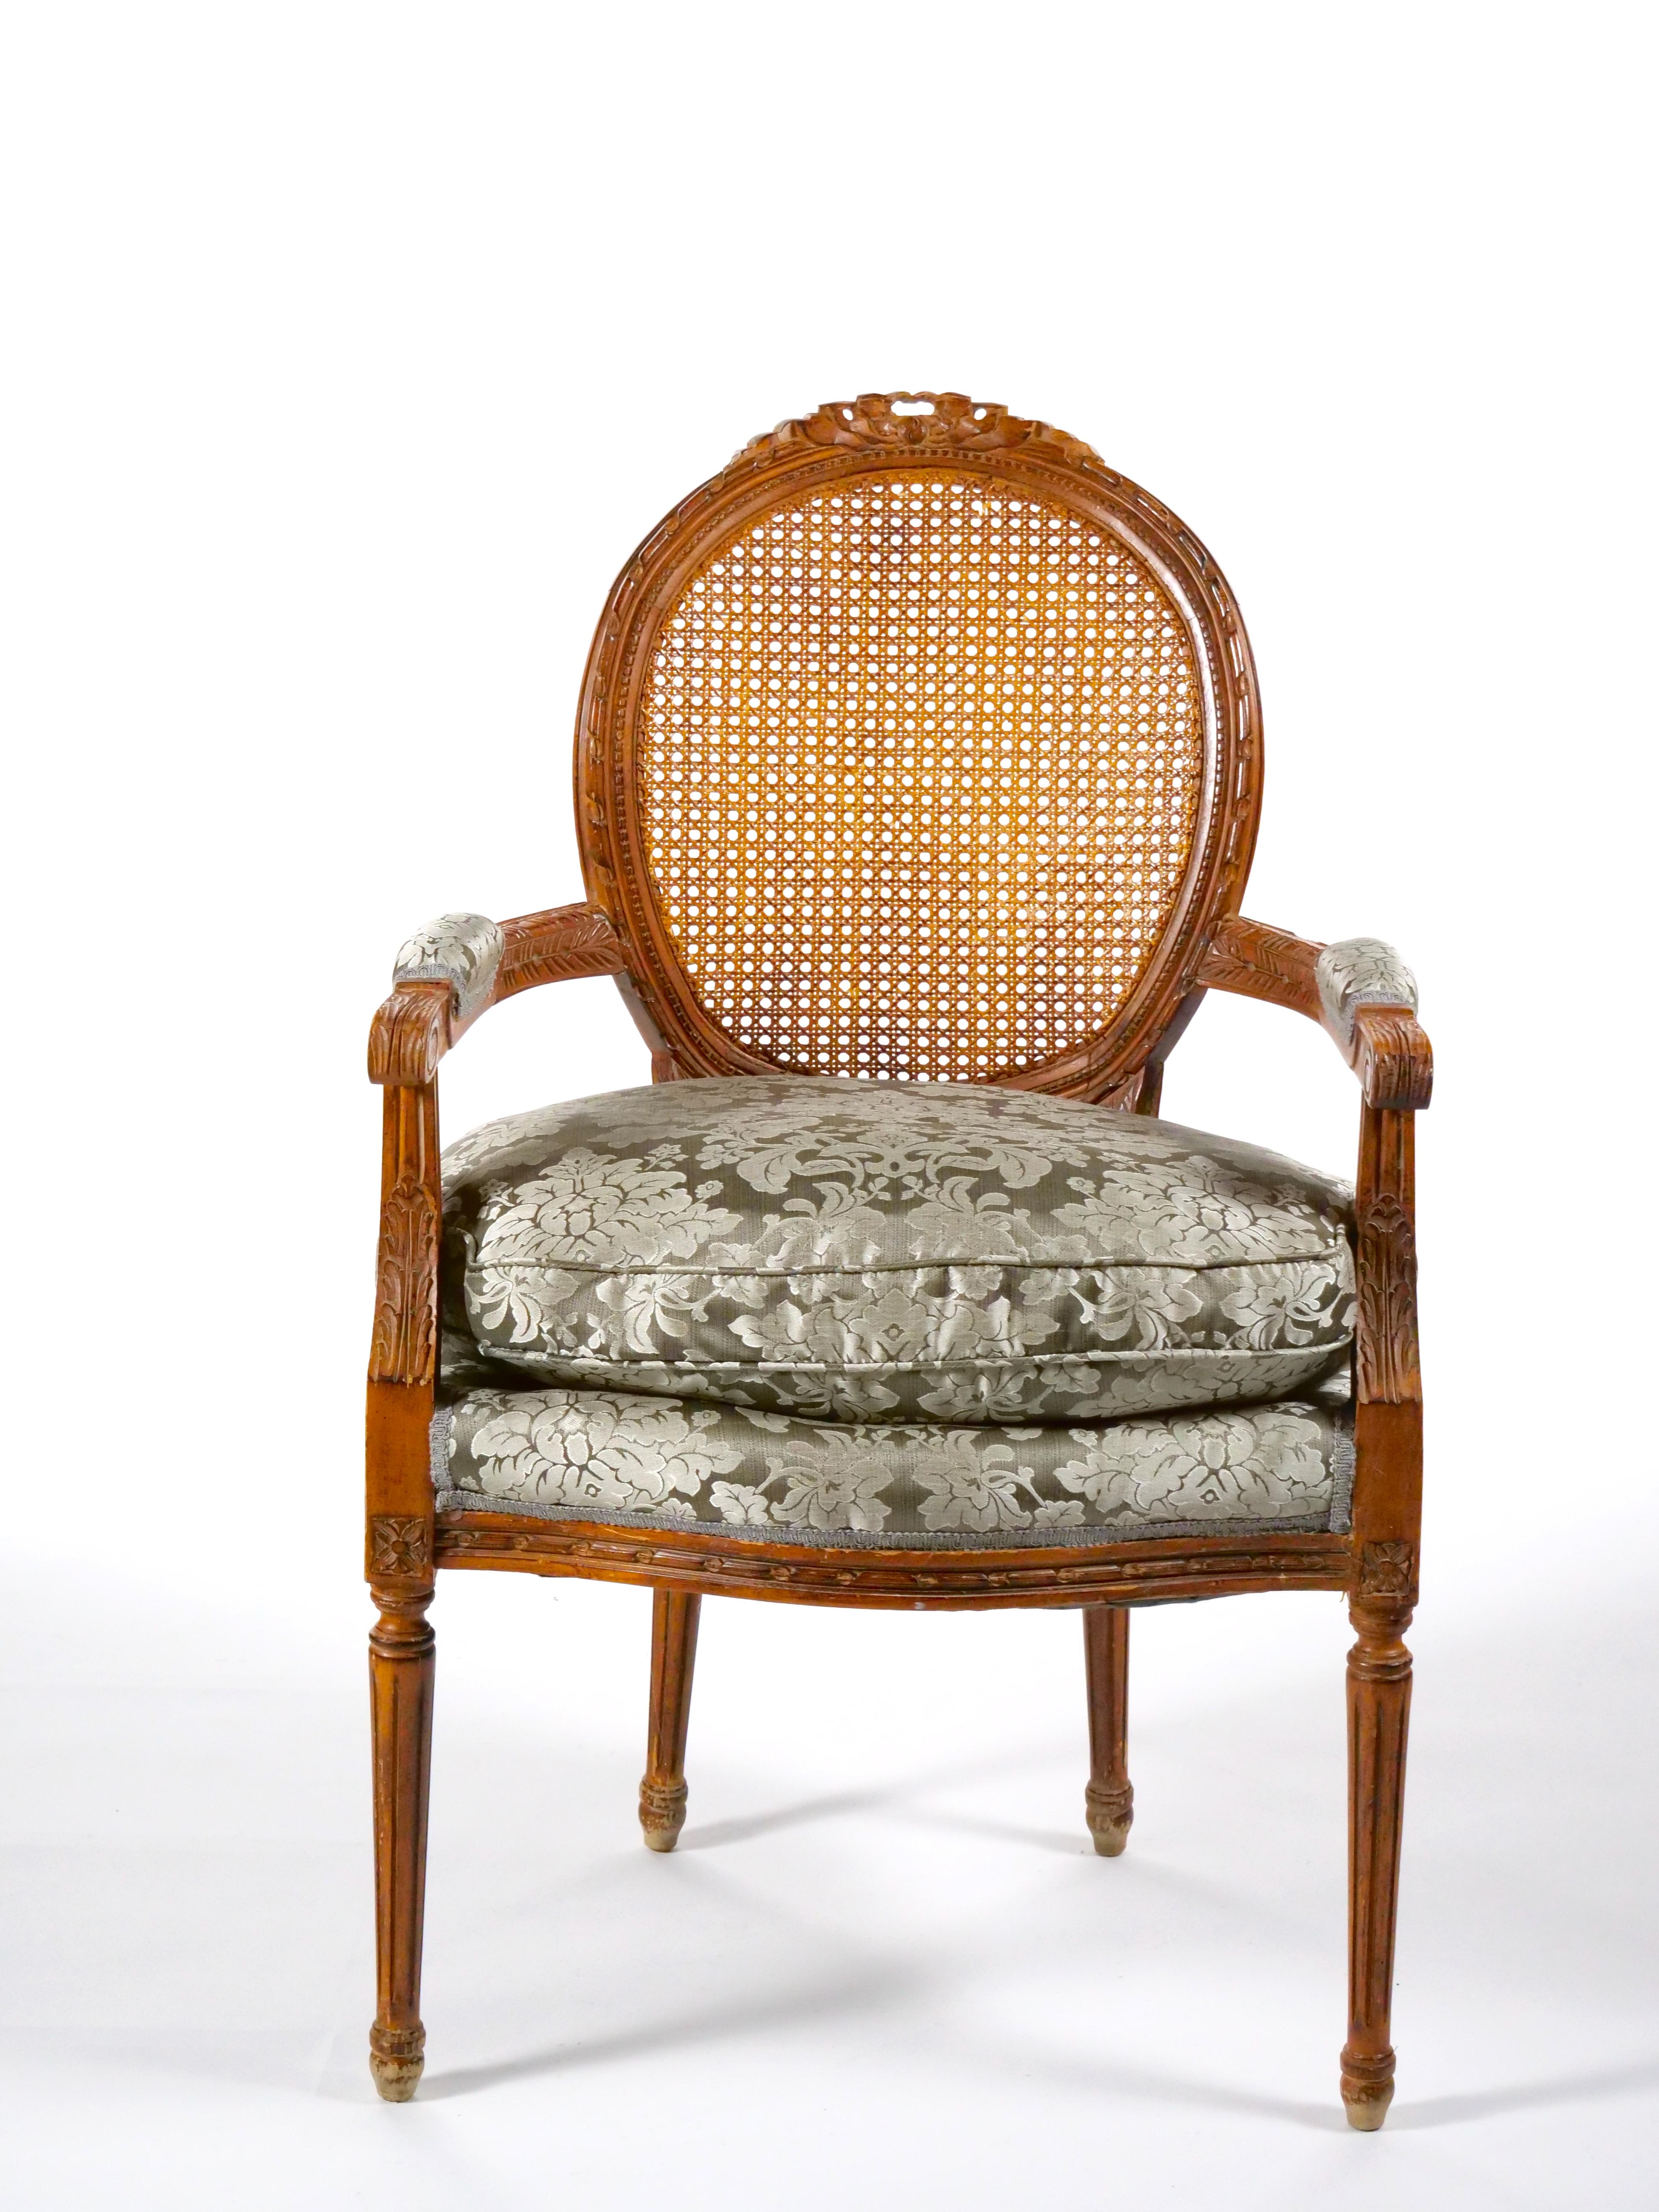 Louis XVI Style Walnut Caned Needlepoint Lounge Chairs For Sale 4